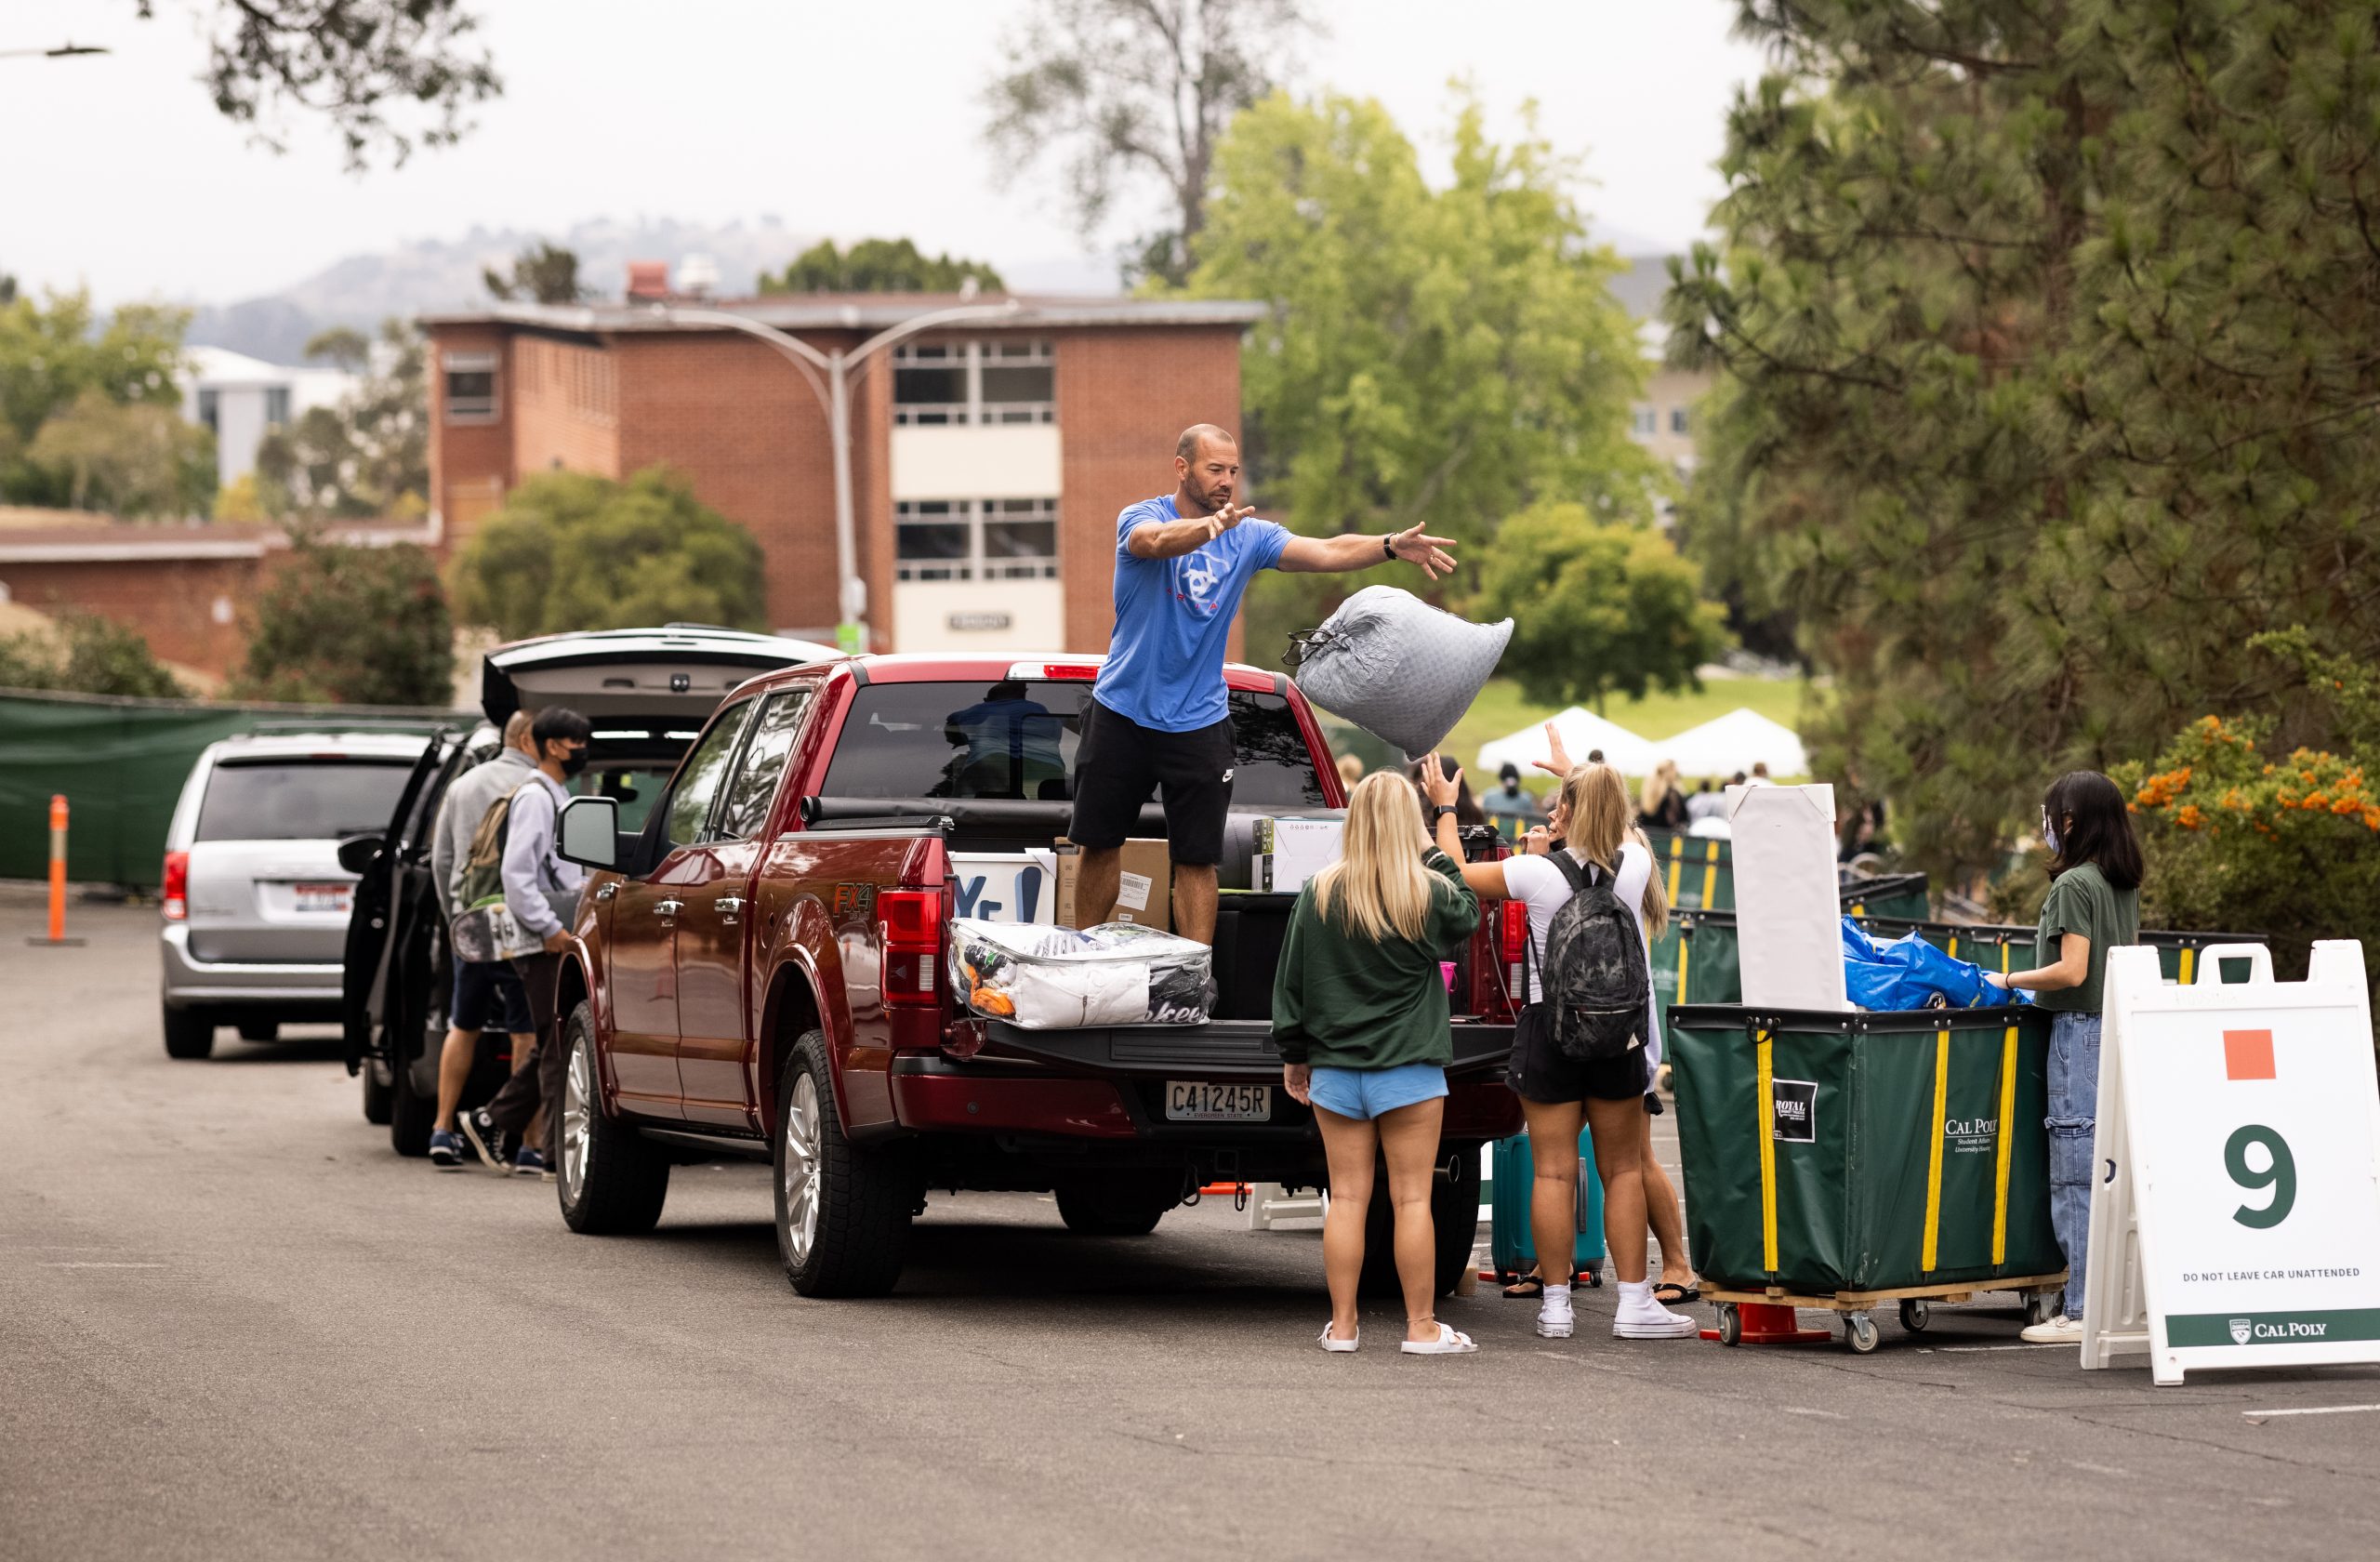 From the bed of a red truck, a man in a blue T shirt tosses a bag to a young woman wearing a backpack in front of the red brick residence halls, in a line of vehicles as families unload student belongings.